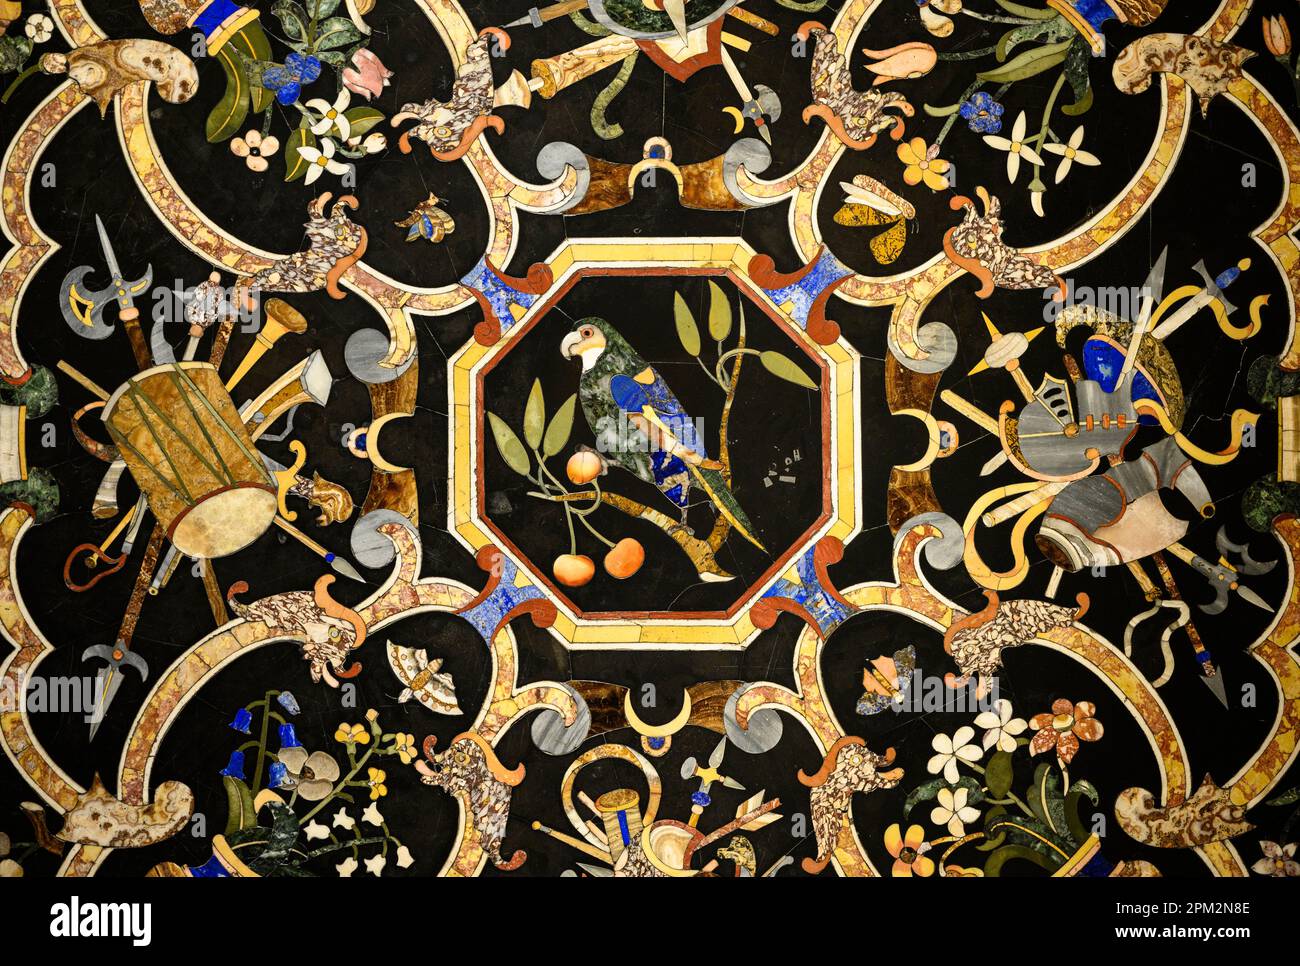 Florence. Italy. Museum of the Opificio delle pietre dure (Workshop of Semi-Precious Stones). Table top with ornaments and trophies, early 17th centur Stock Photo